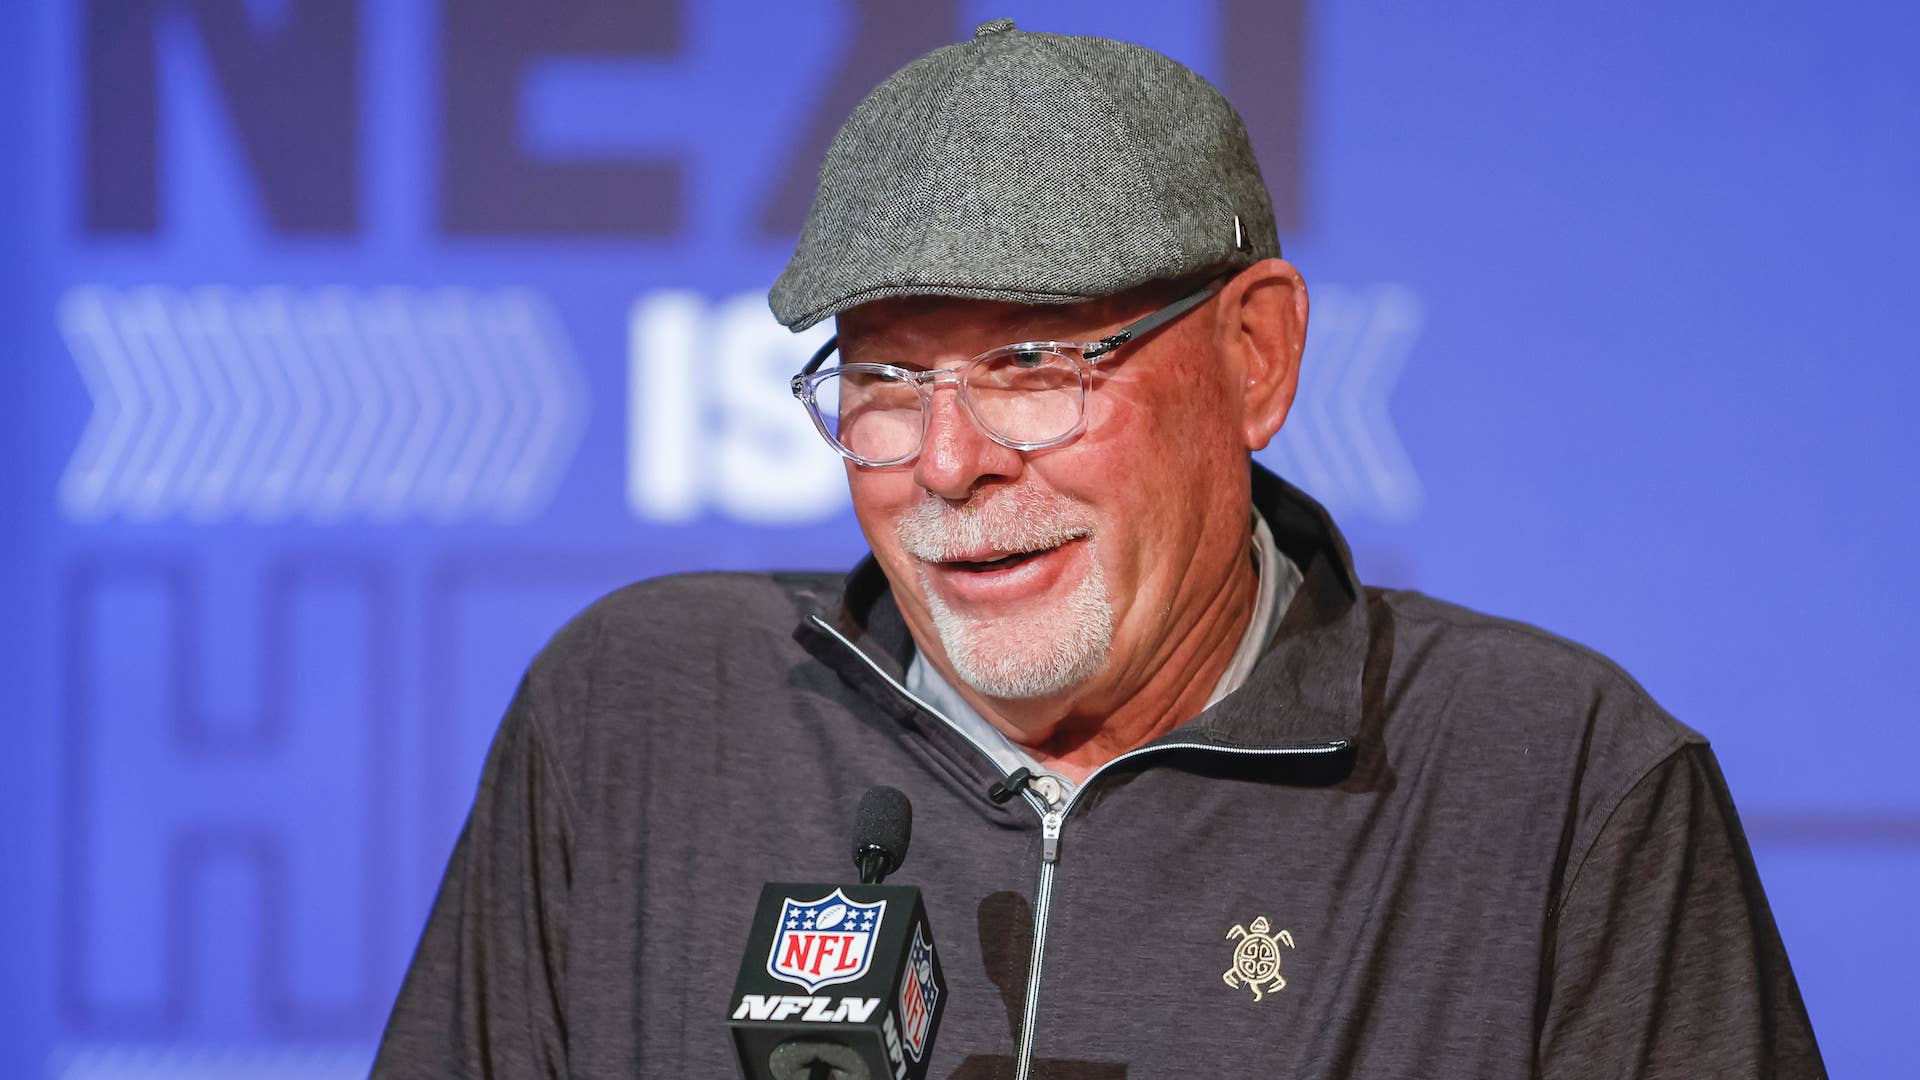 Bruce Arians, head coach of the Tampa Bay Buccaneers speaks to reporters .